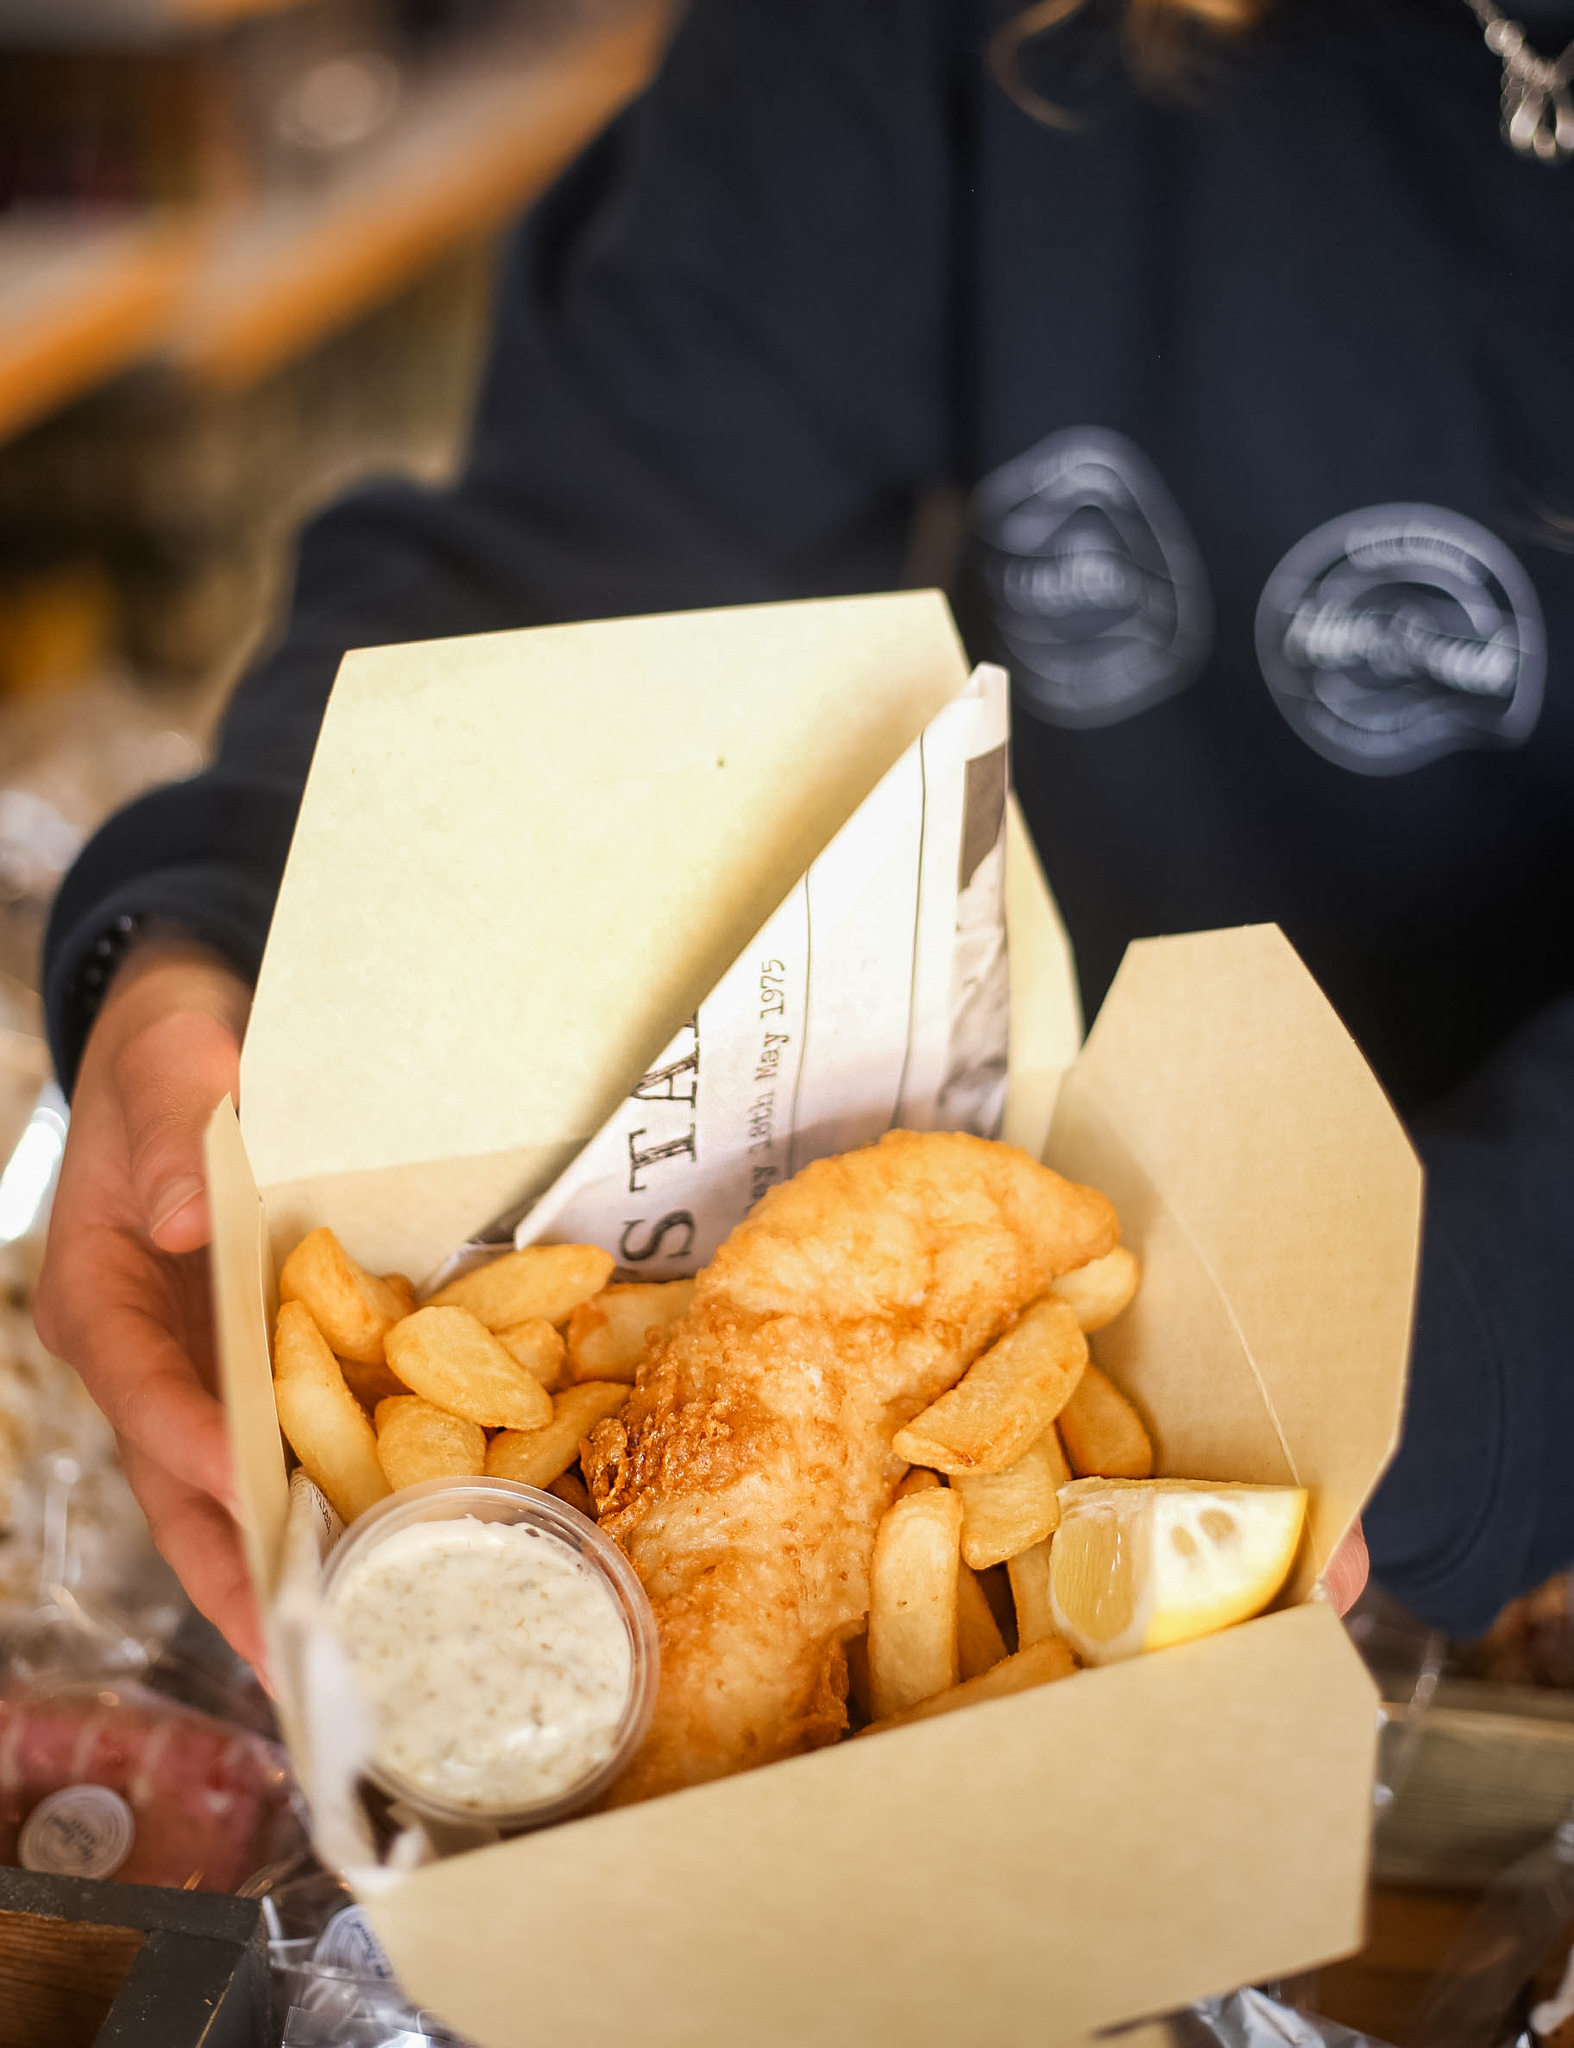 The Hive Beach Café and its sister restaurants use Earthshot Prize winner Notpla's plastic-free takeaway packaging